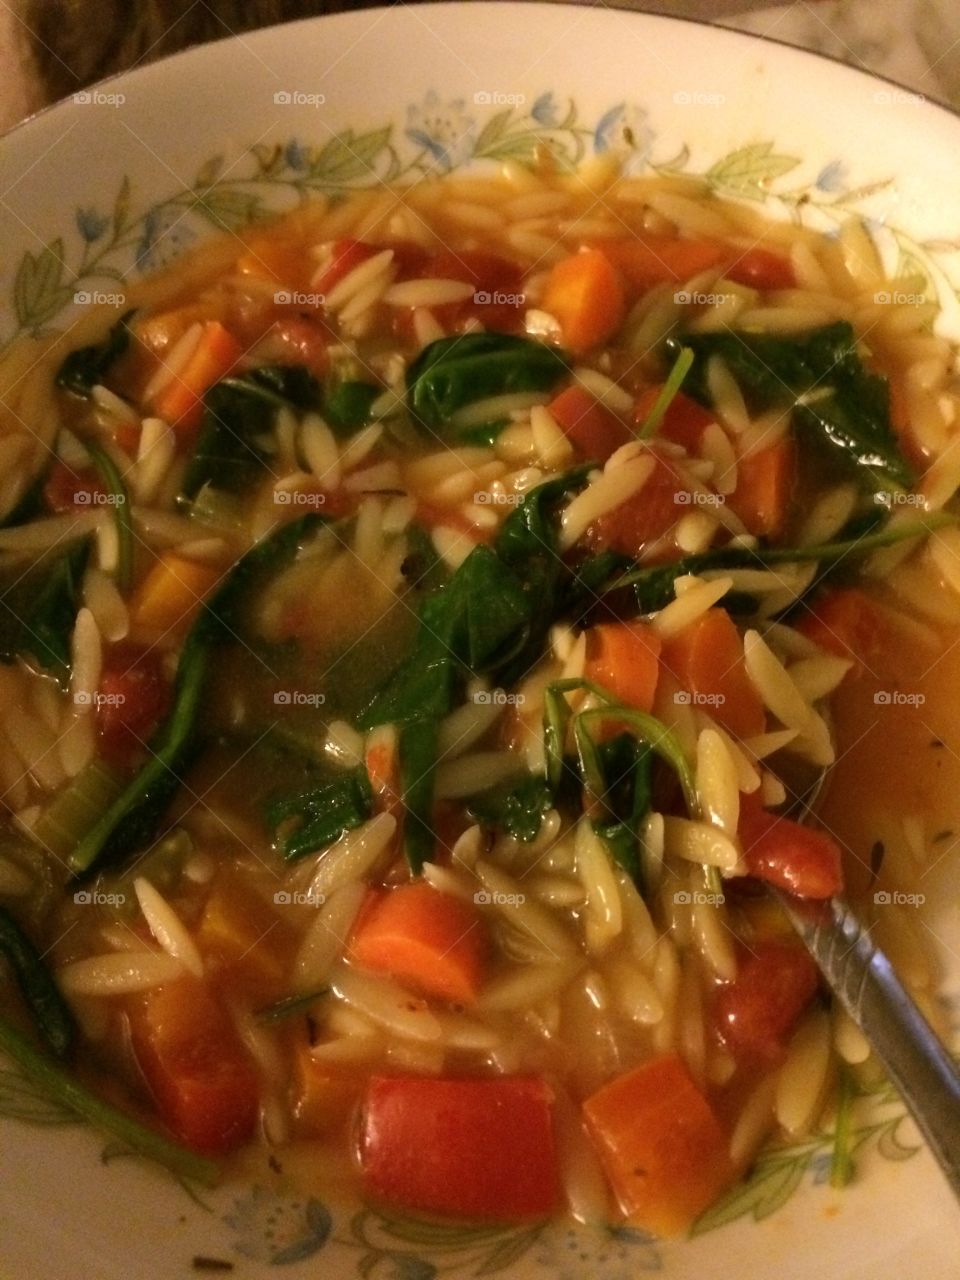 Orzo spinach soup
